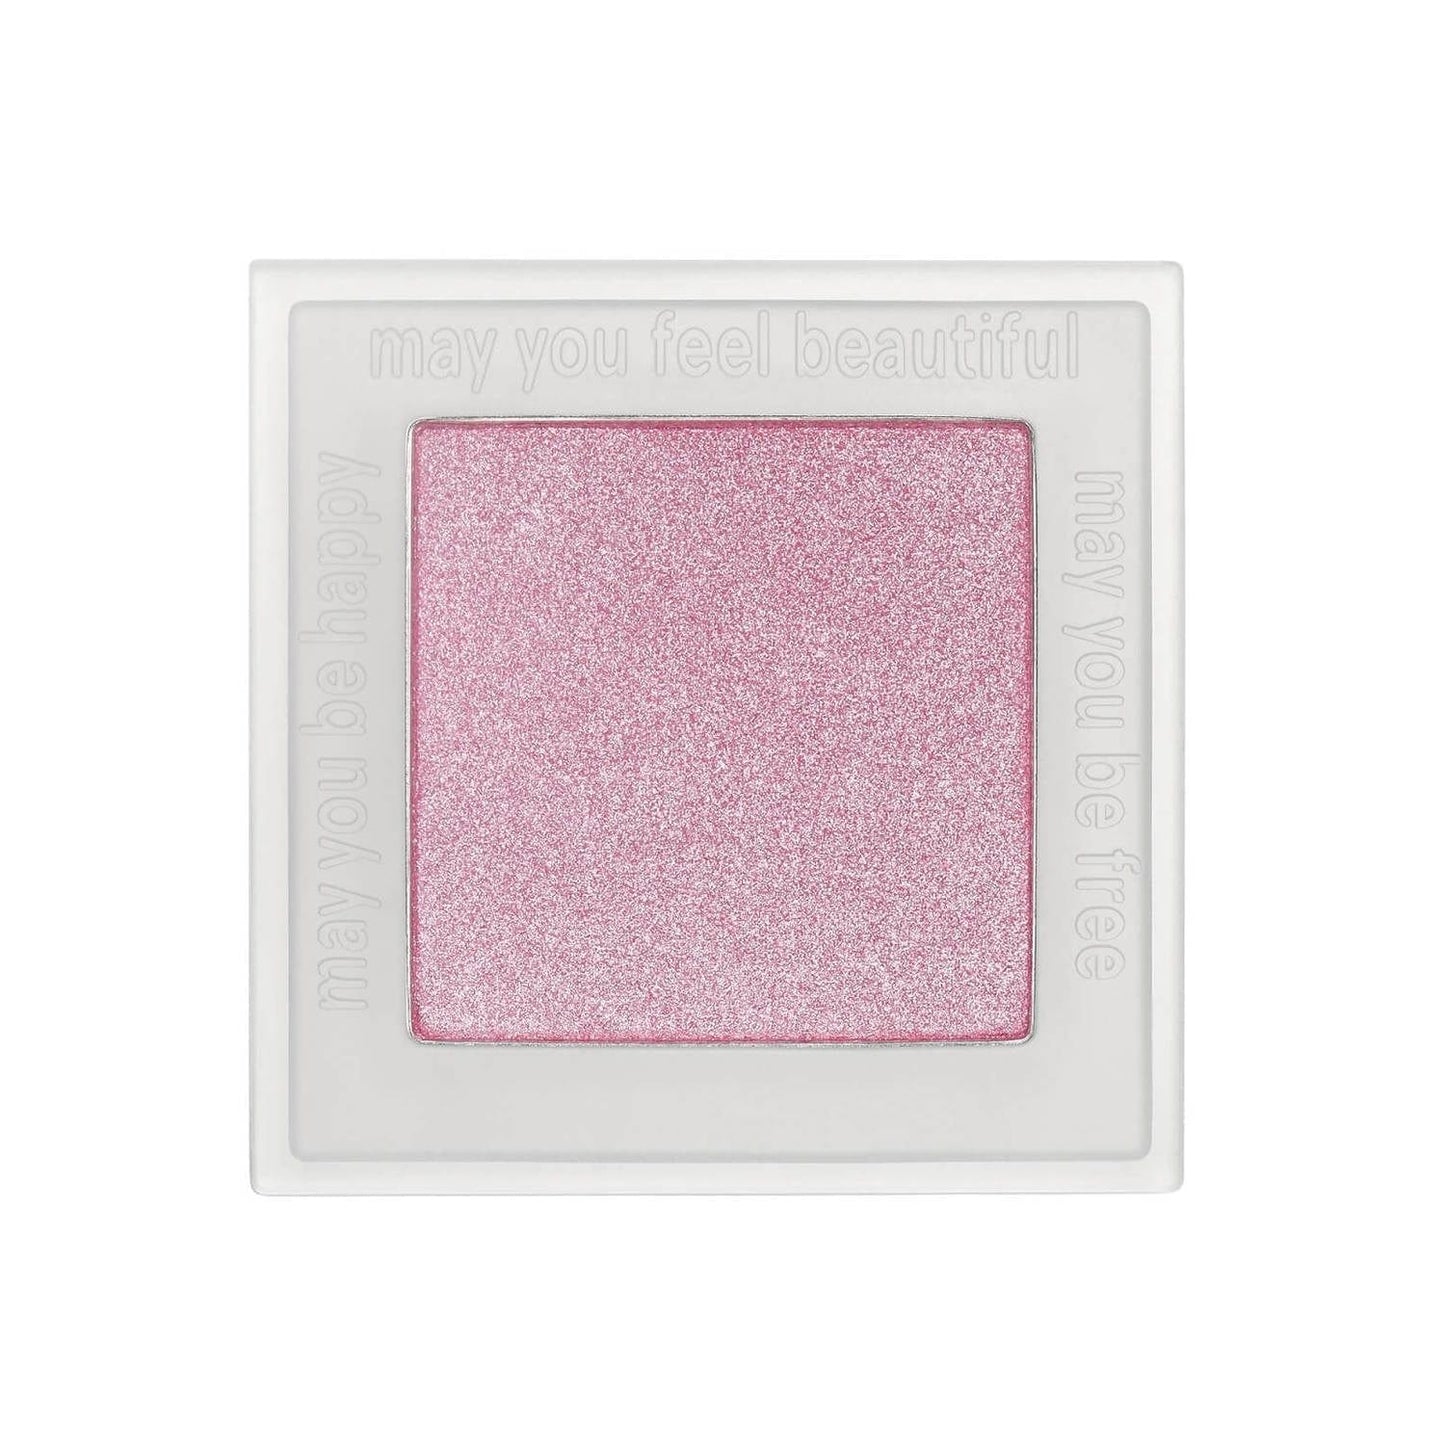 Neen Beauty Neen Pretty Shady Pressed Pigment Shadow - Sprinkle